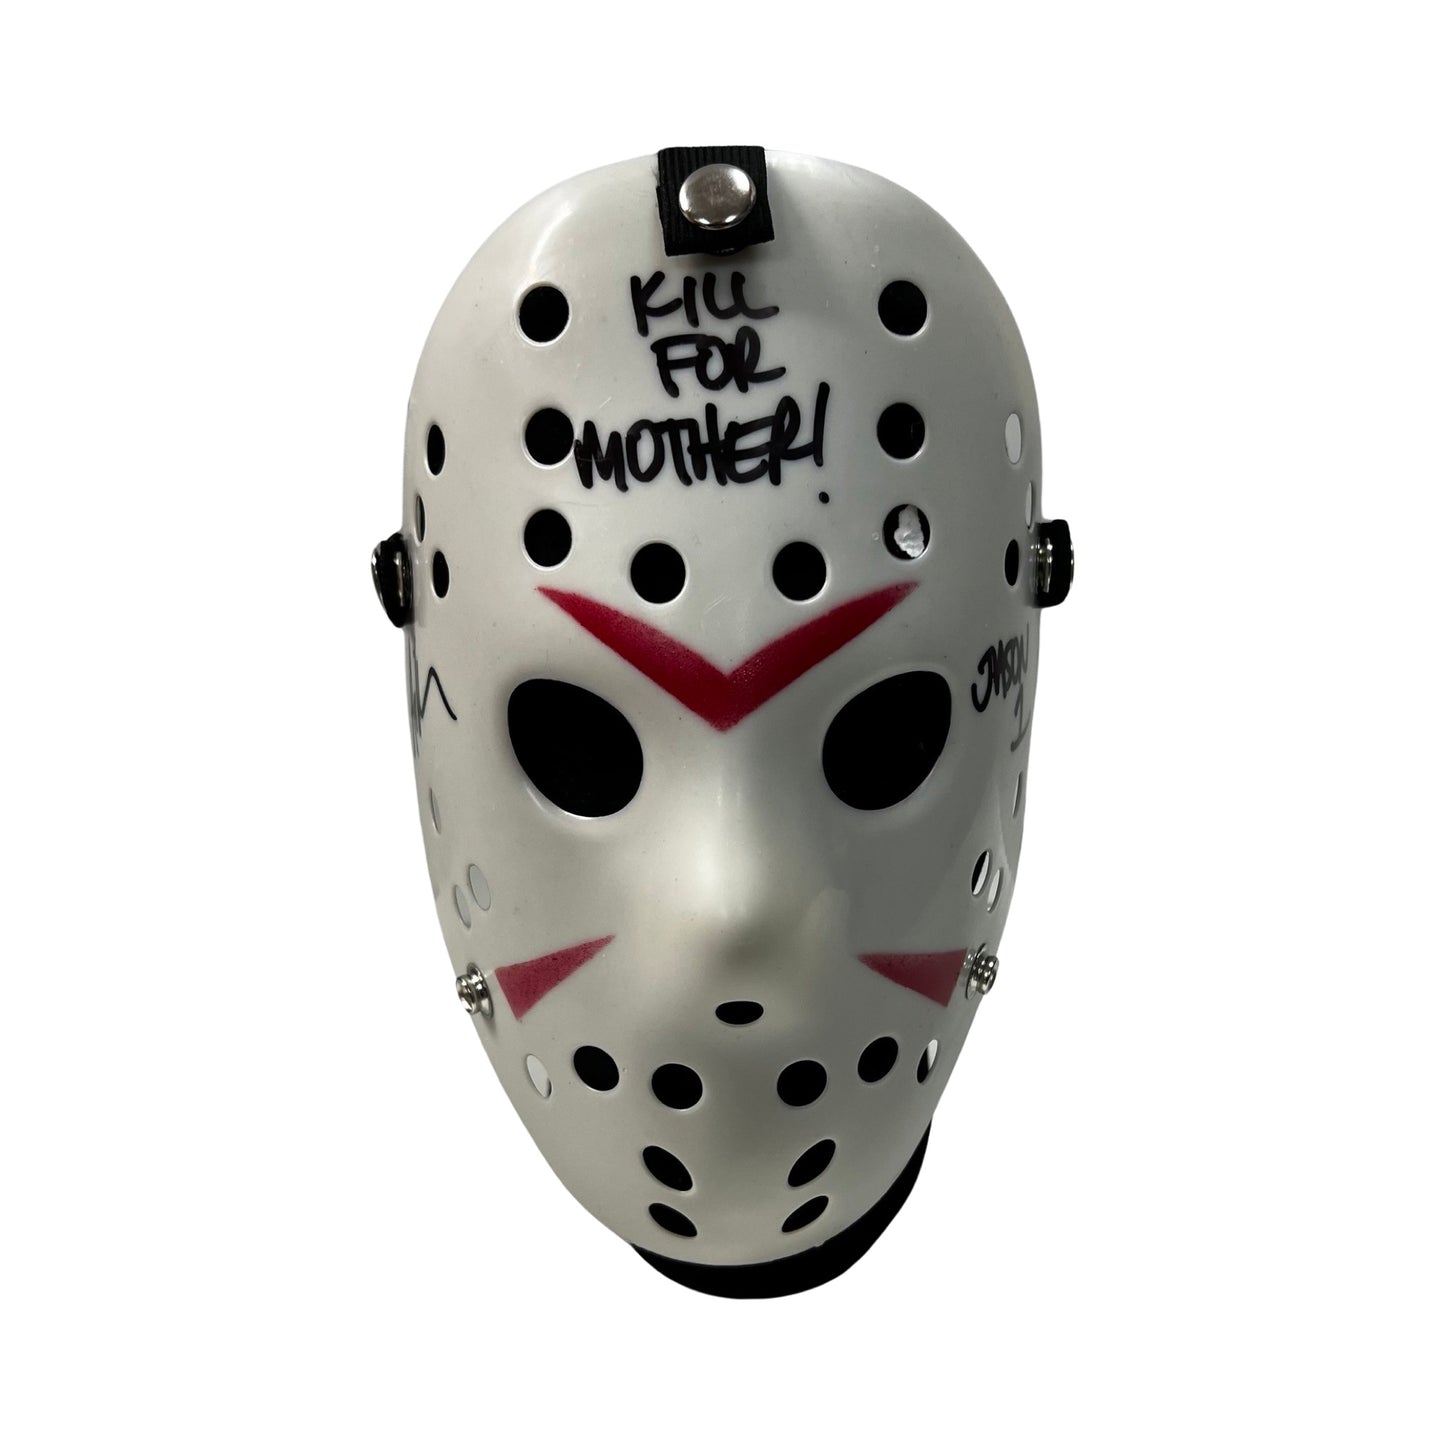 Ari Lehman Autographed Jason Voorhees Friday the 13th White Mask “Kill for Mother! Jason 1” Inscriptions Steiner CX